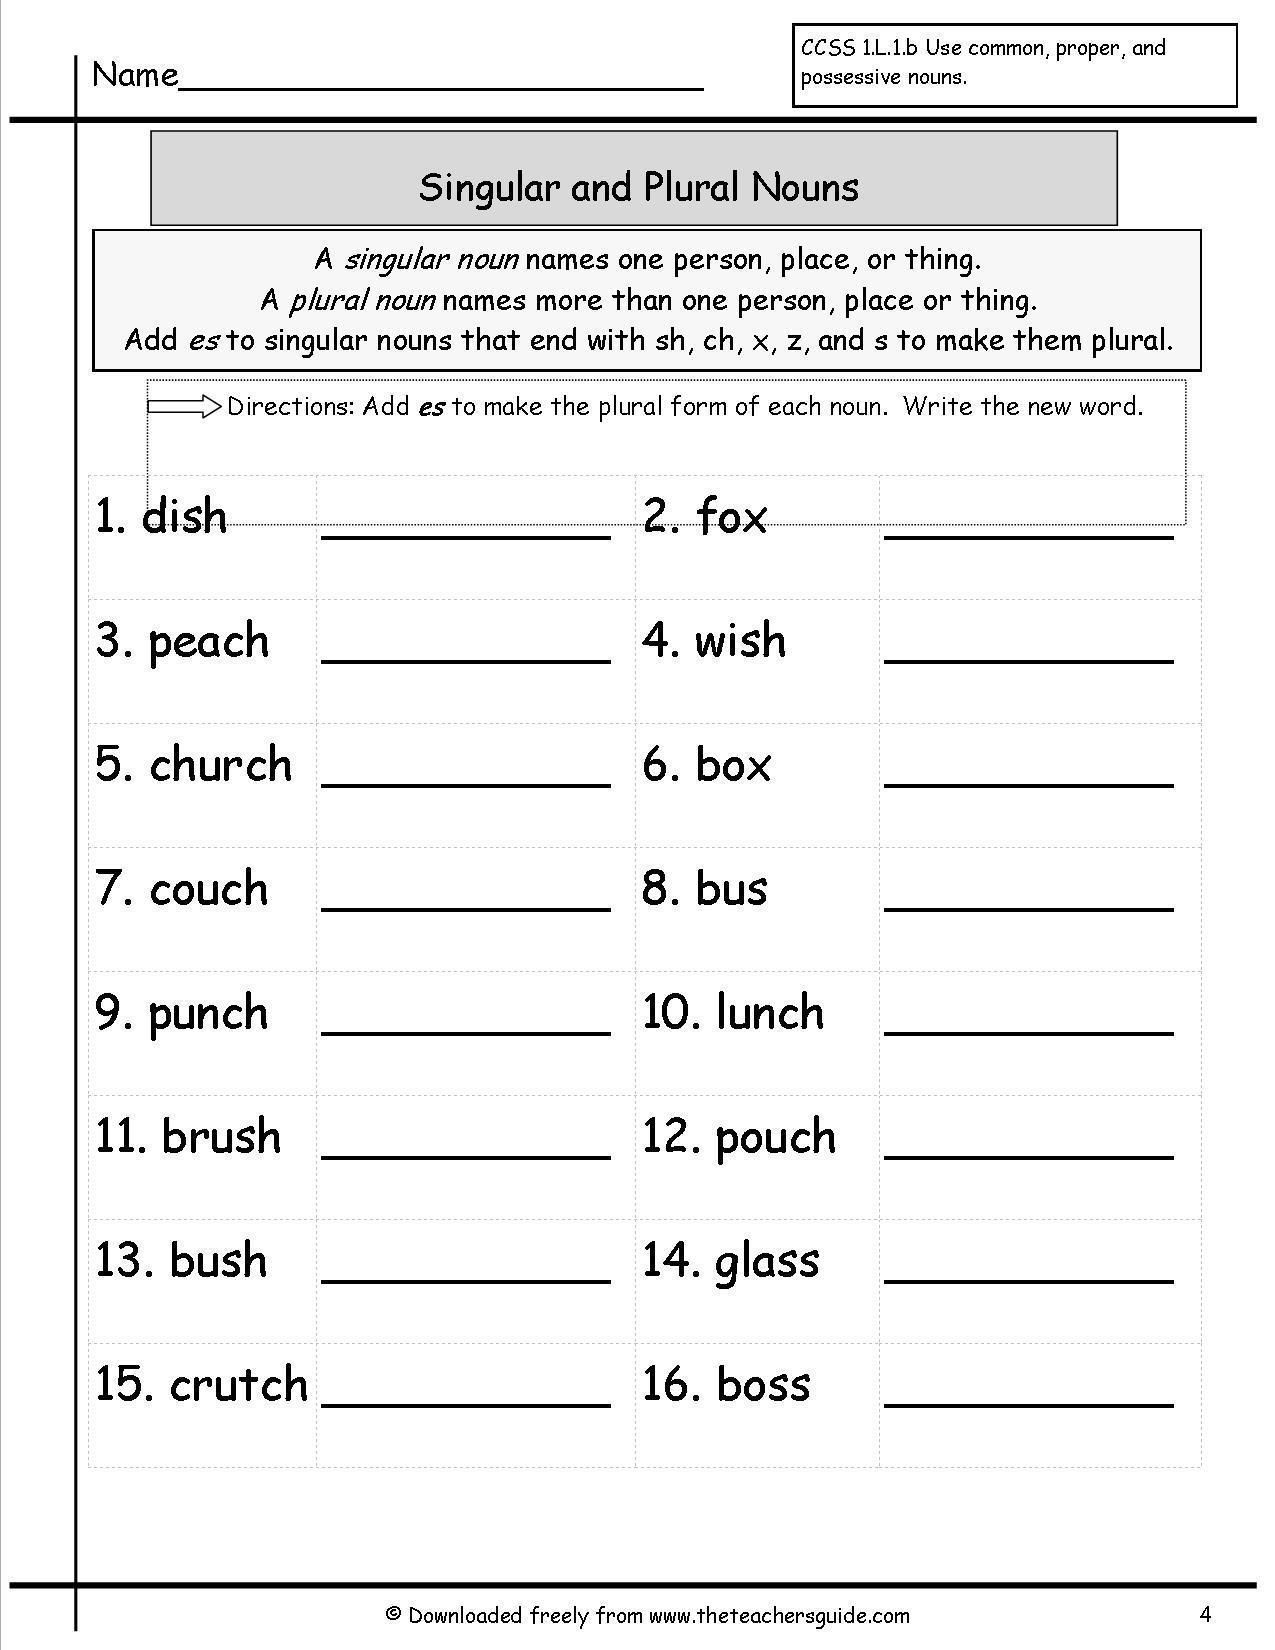 verbs-exercises-with-answers-worksheet-examplanning